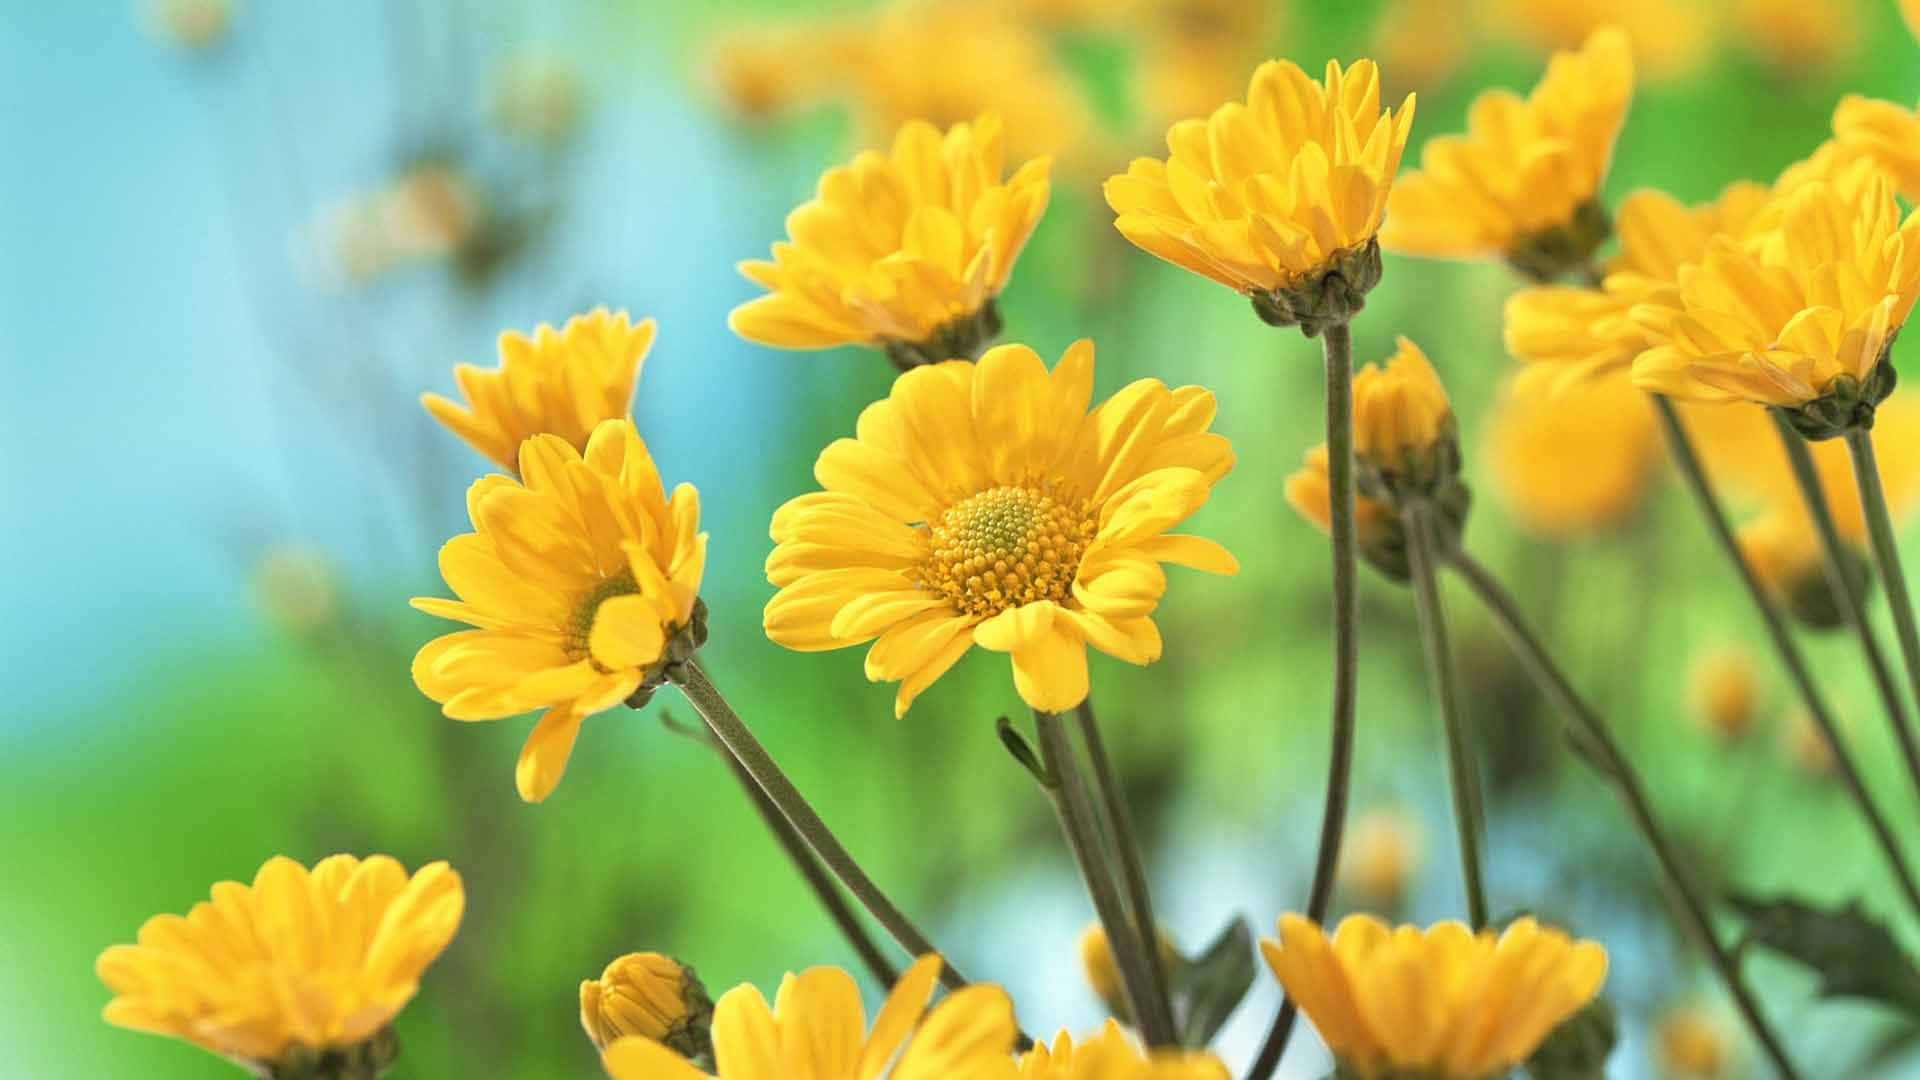 hd wallpapers of flowers for laptop